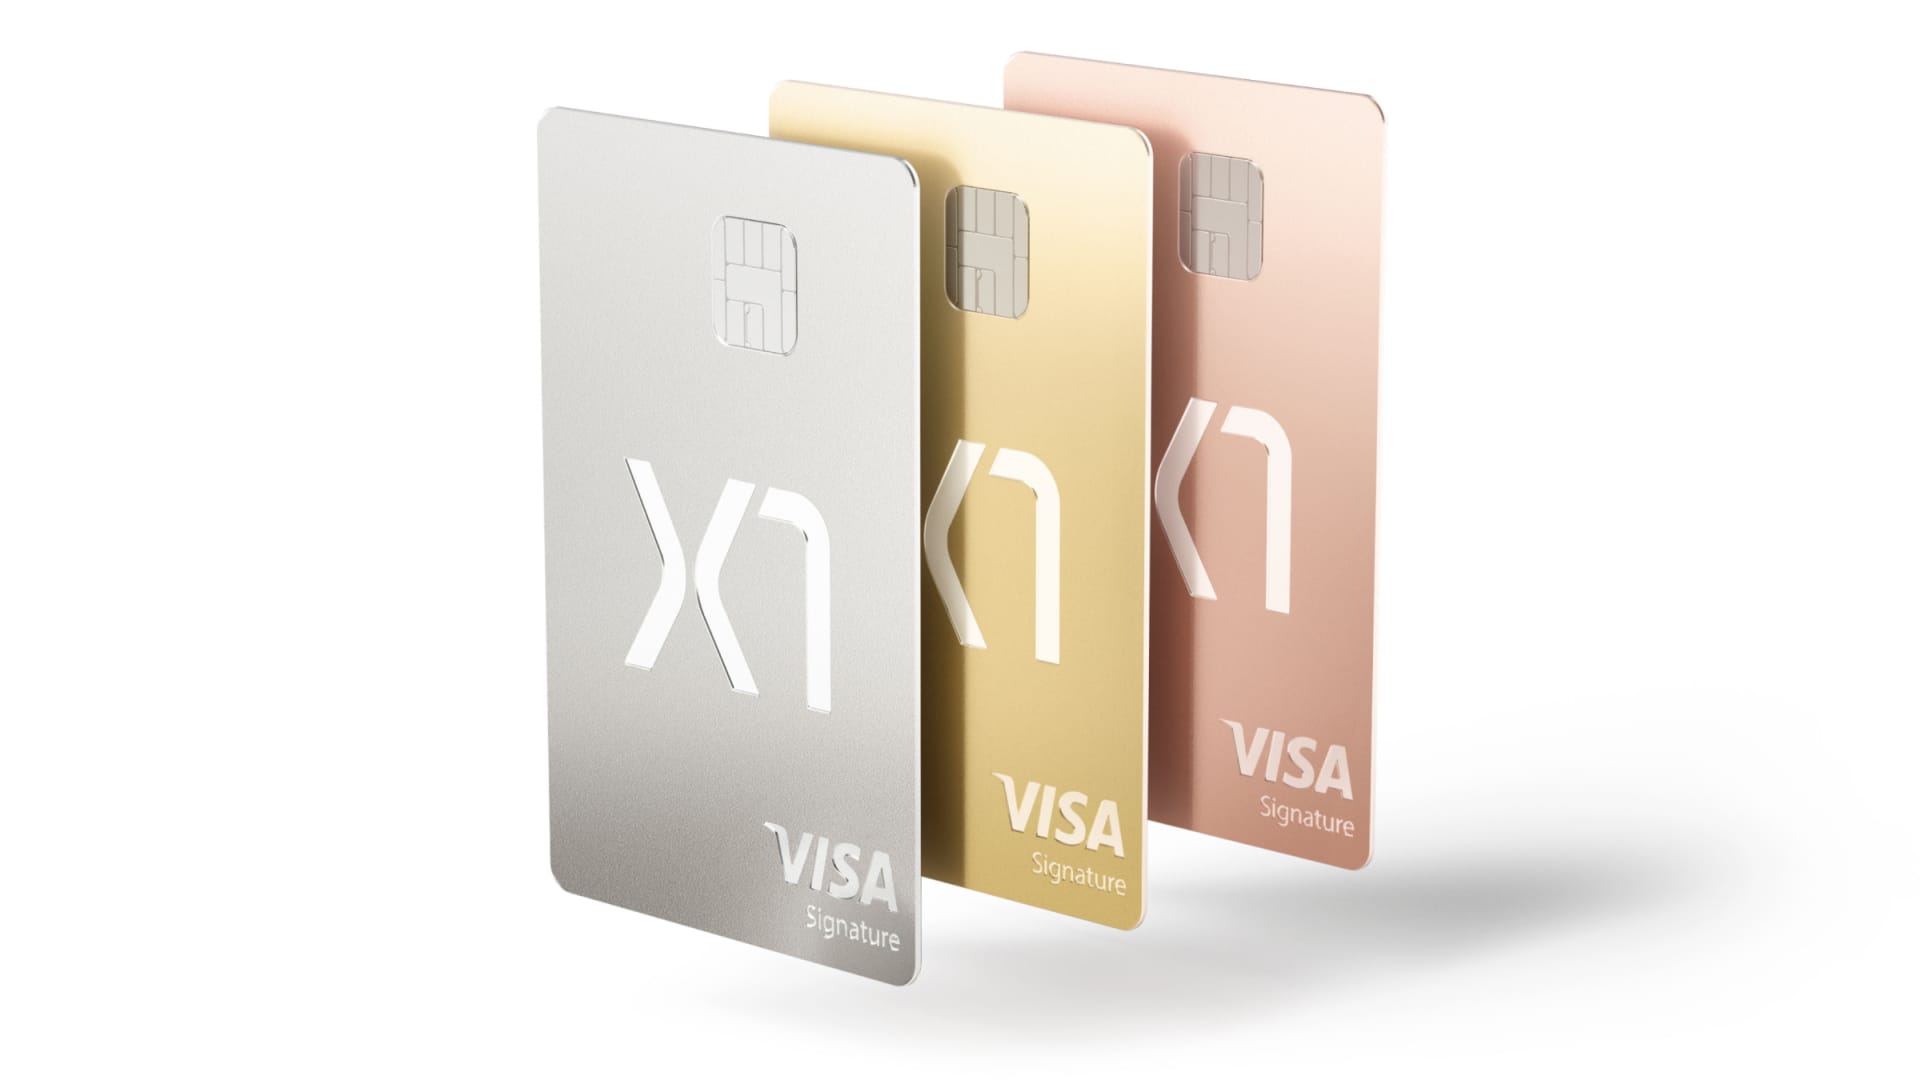 The new X1+ Card offers unique lounge benefits, solid travel insurance and a reasonable annual fee